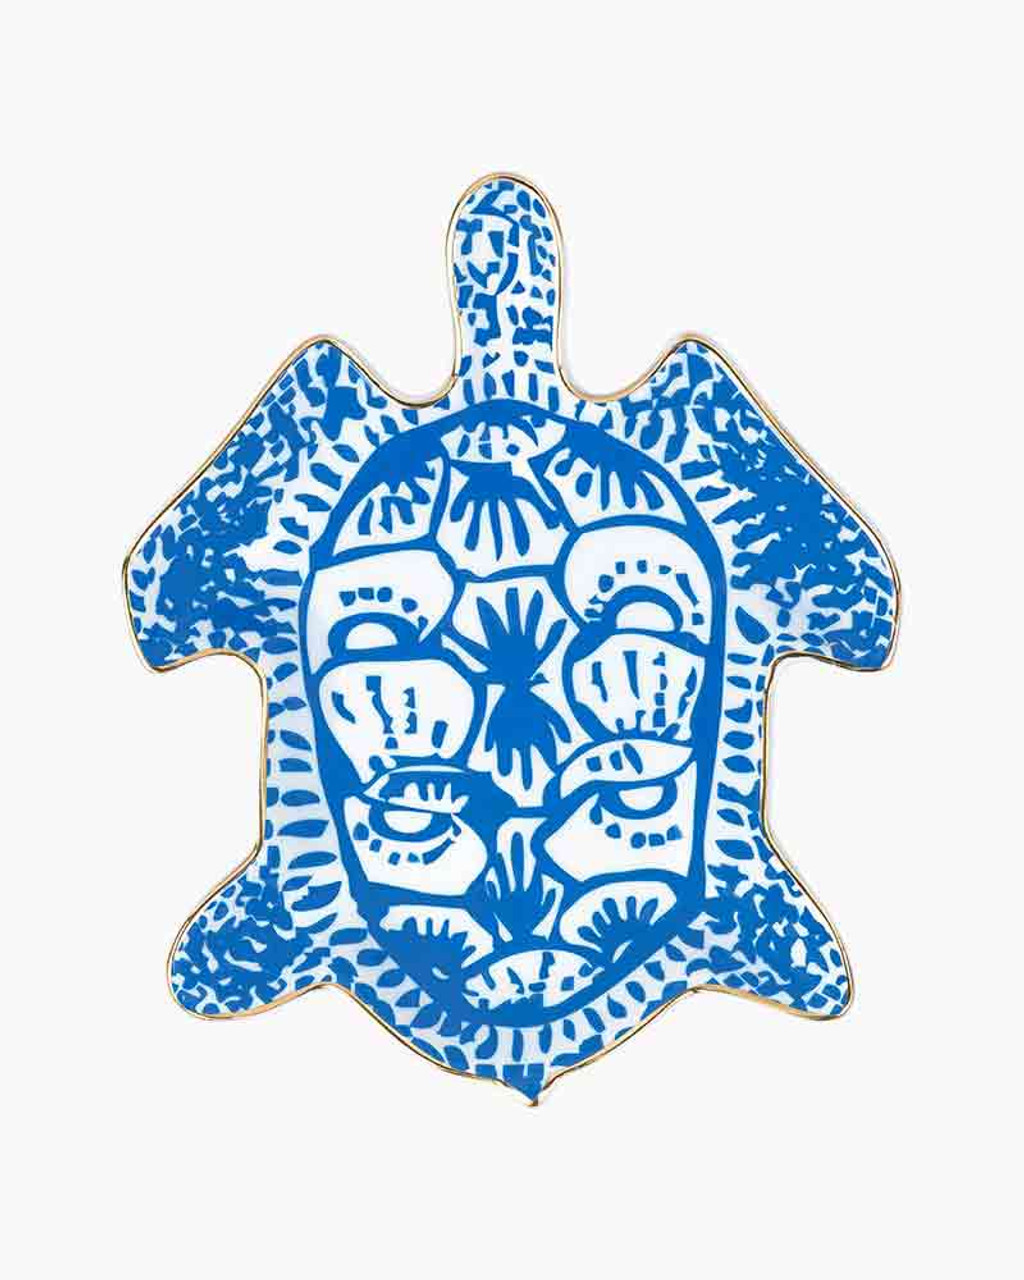 Lilly Pulitzer Turtley Awesome Round Key Chain